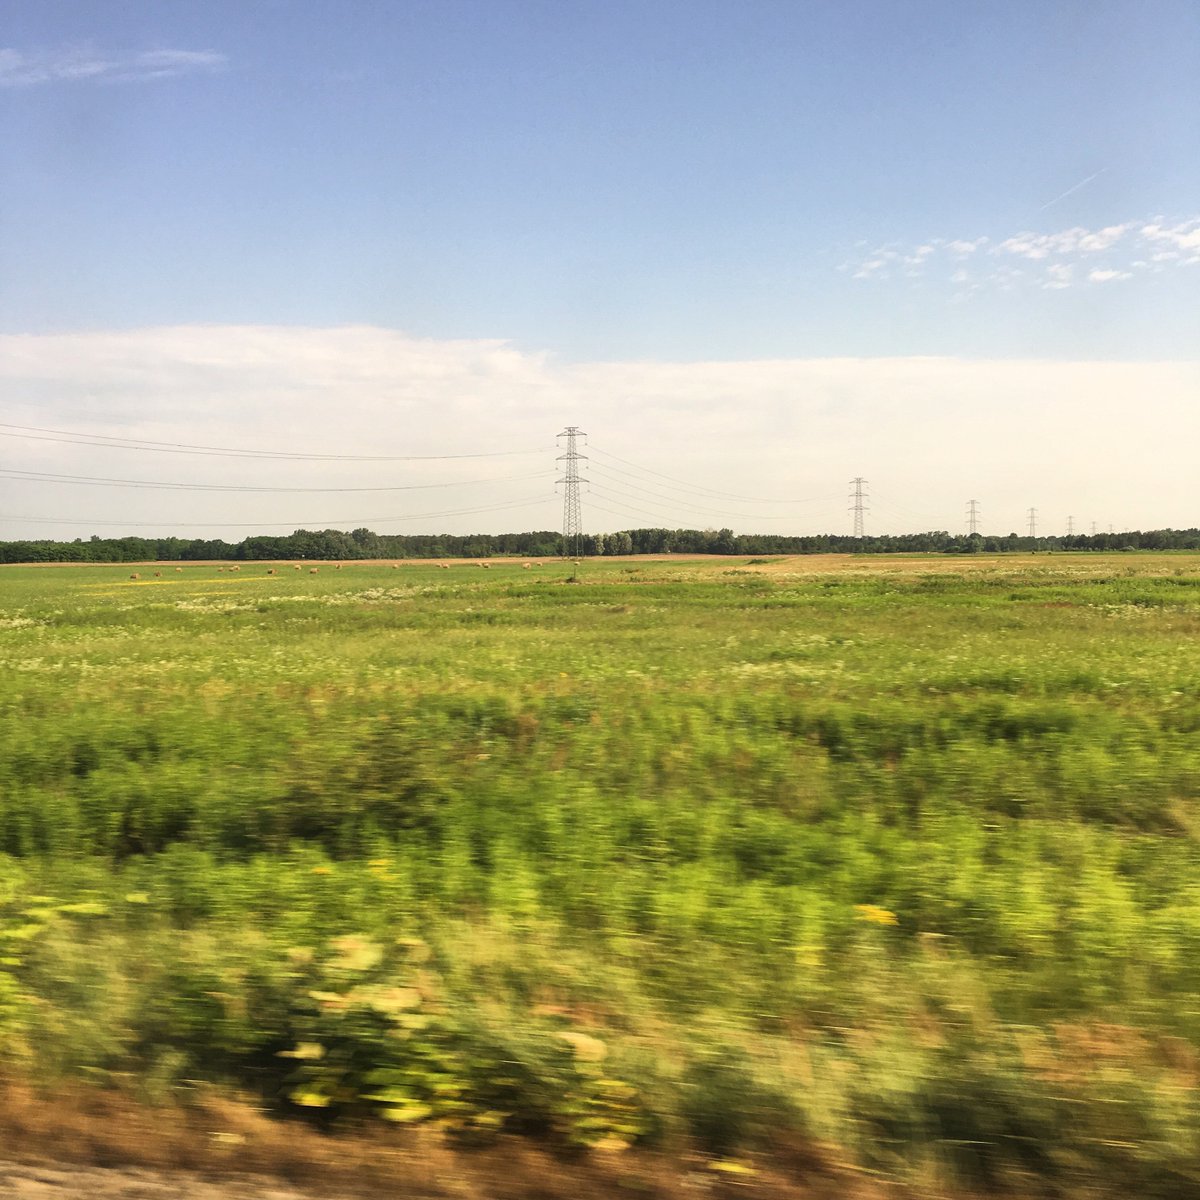  #theCitybyrail Day 2. After the best night of sleep I have ever had on a train (sadly, given we had two more nights of sleeper travel to go, this record remains!) We woke up in Hungary - my first glimpse of the country was Nagyszentjános, not that far from the Slovak border.